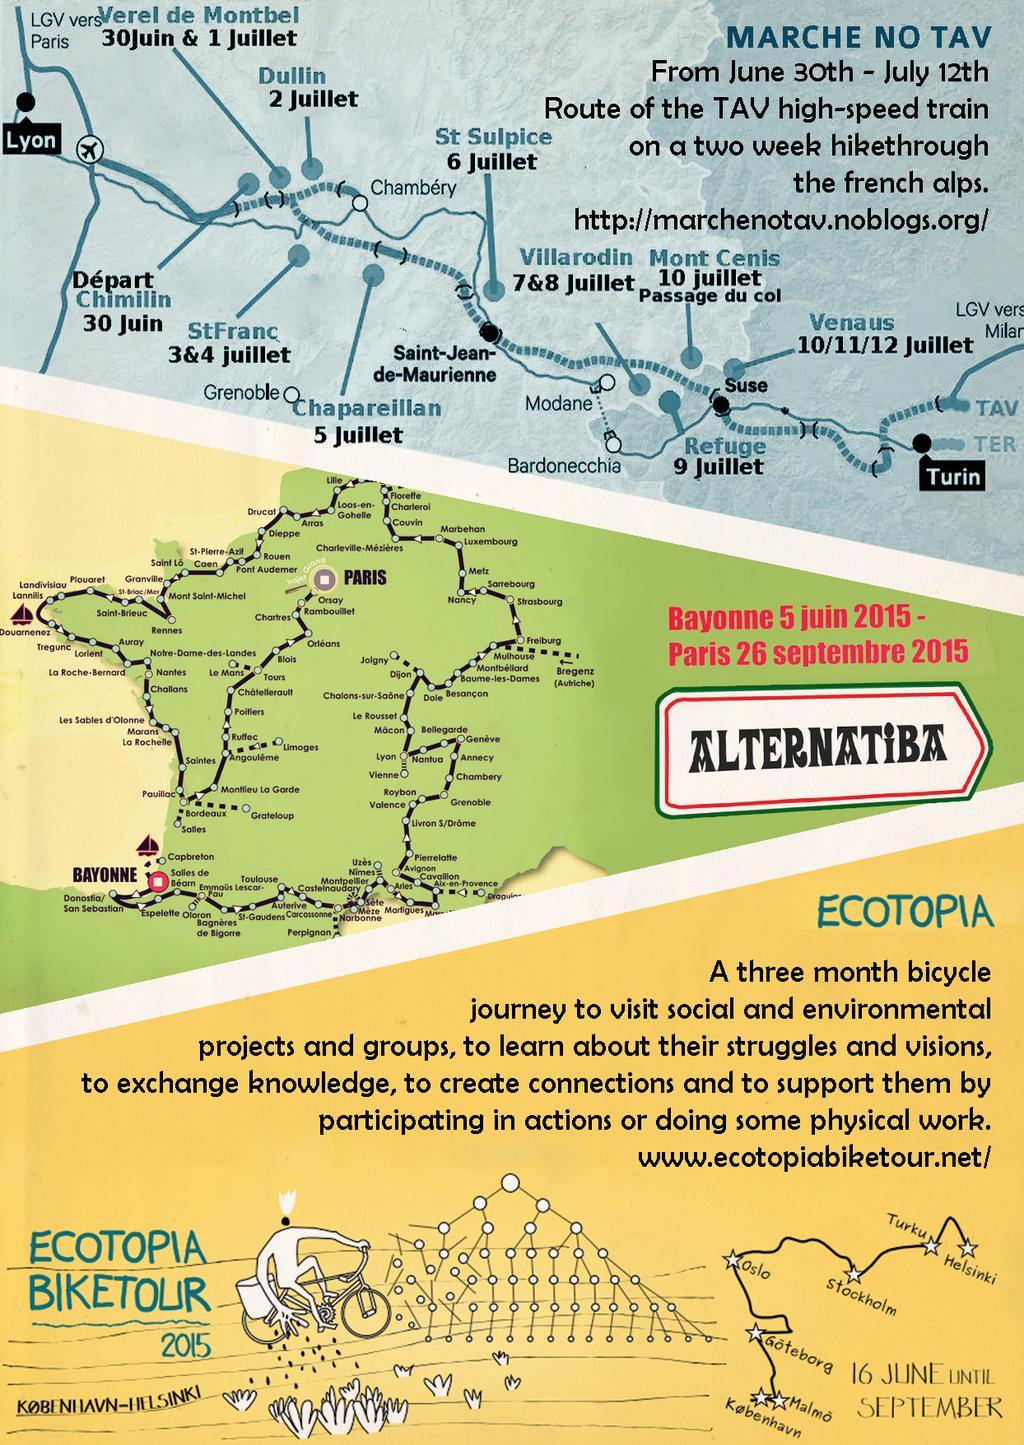 A 3 month bicycle journey to visit social and environmental projects and